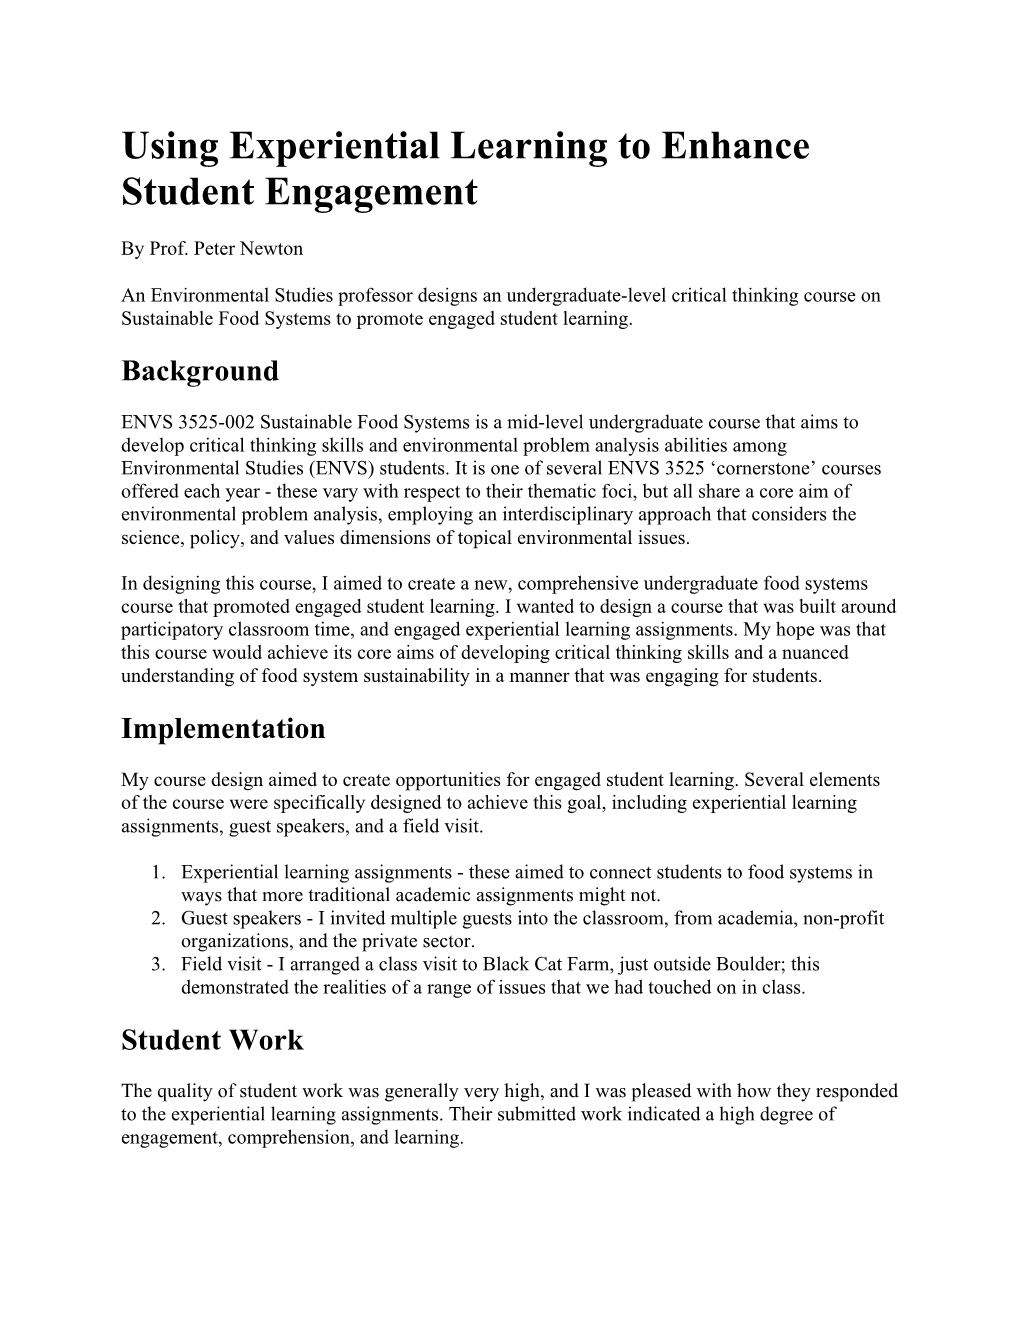 Using Experiential Learning to Enhance Student Engagement